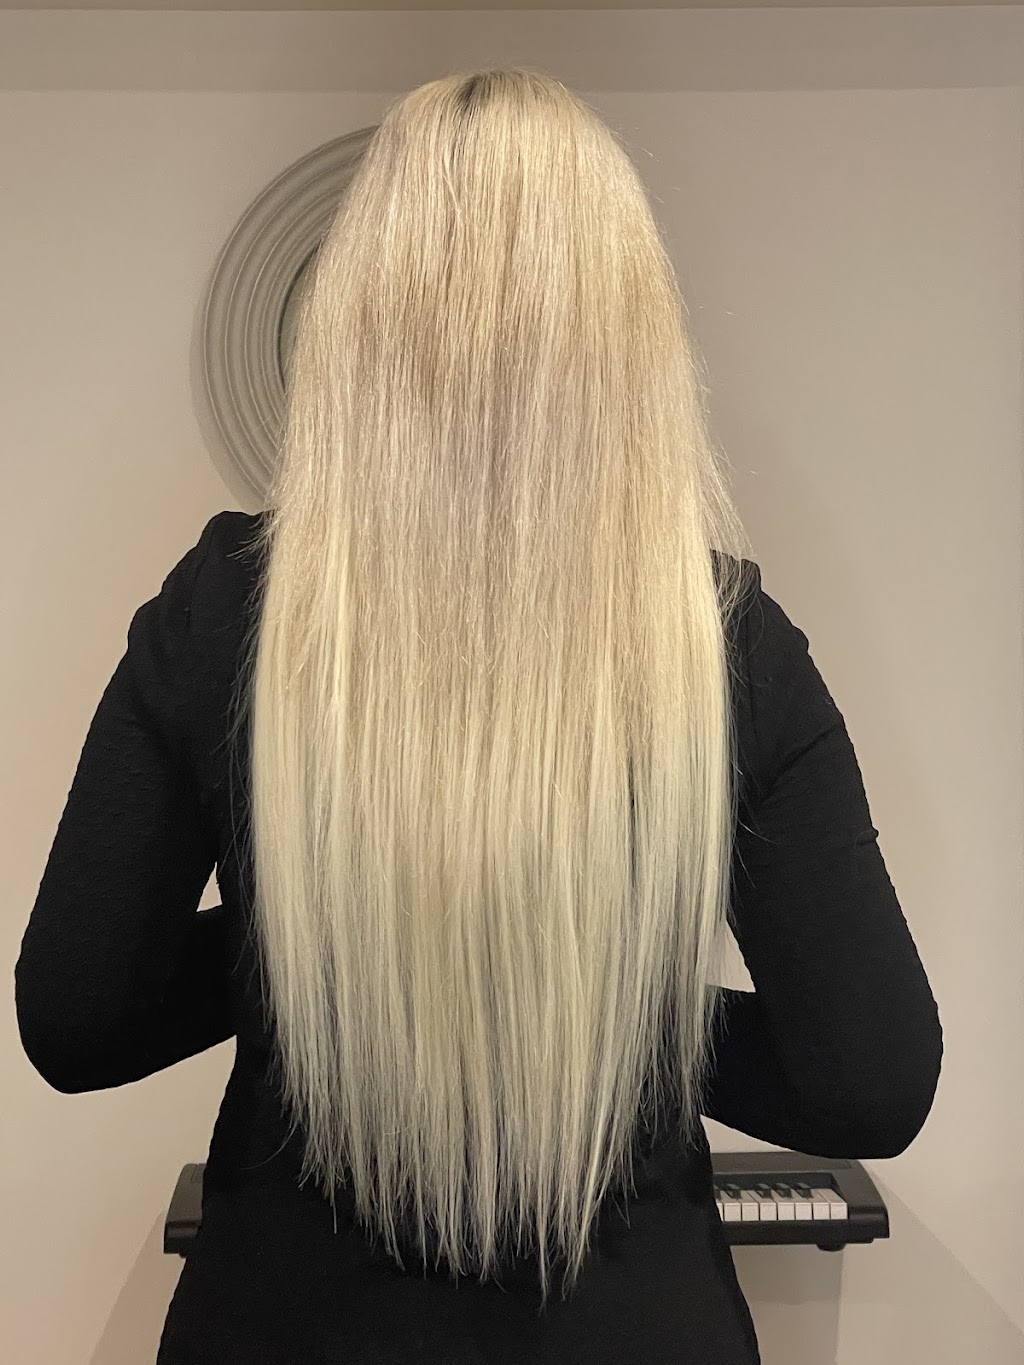 Cloud of Hair | 25 Costa Del Sol Ave, Coombabah QLD 4216, Australia | Phone: 0435 378 739